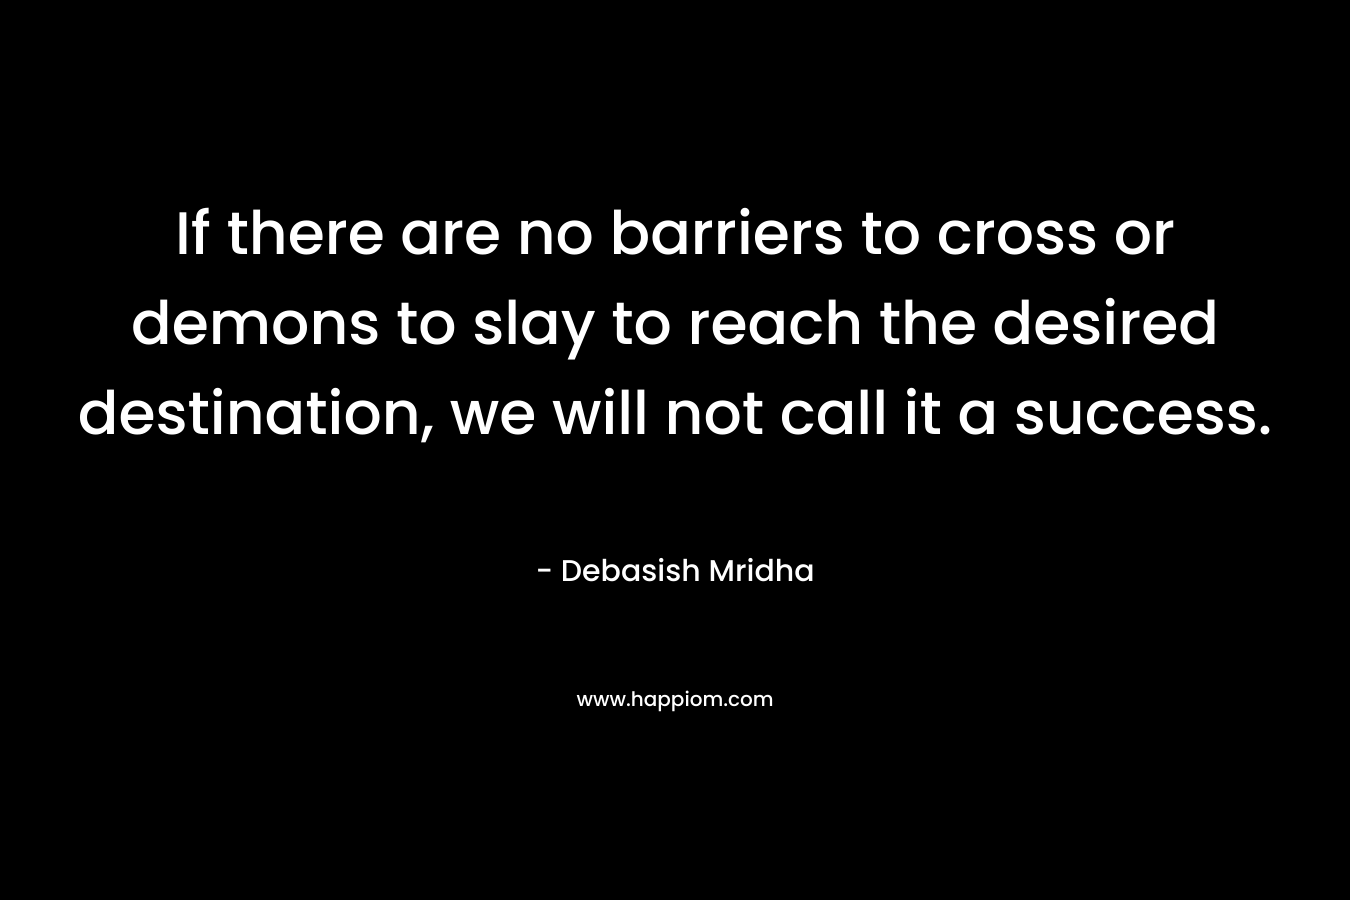 If there are no barriers to cross or demons to slay to reach the desired destination, we will not call it a success. – Debasish Mridha